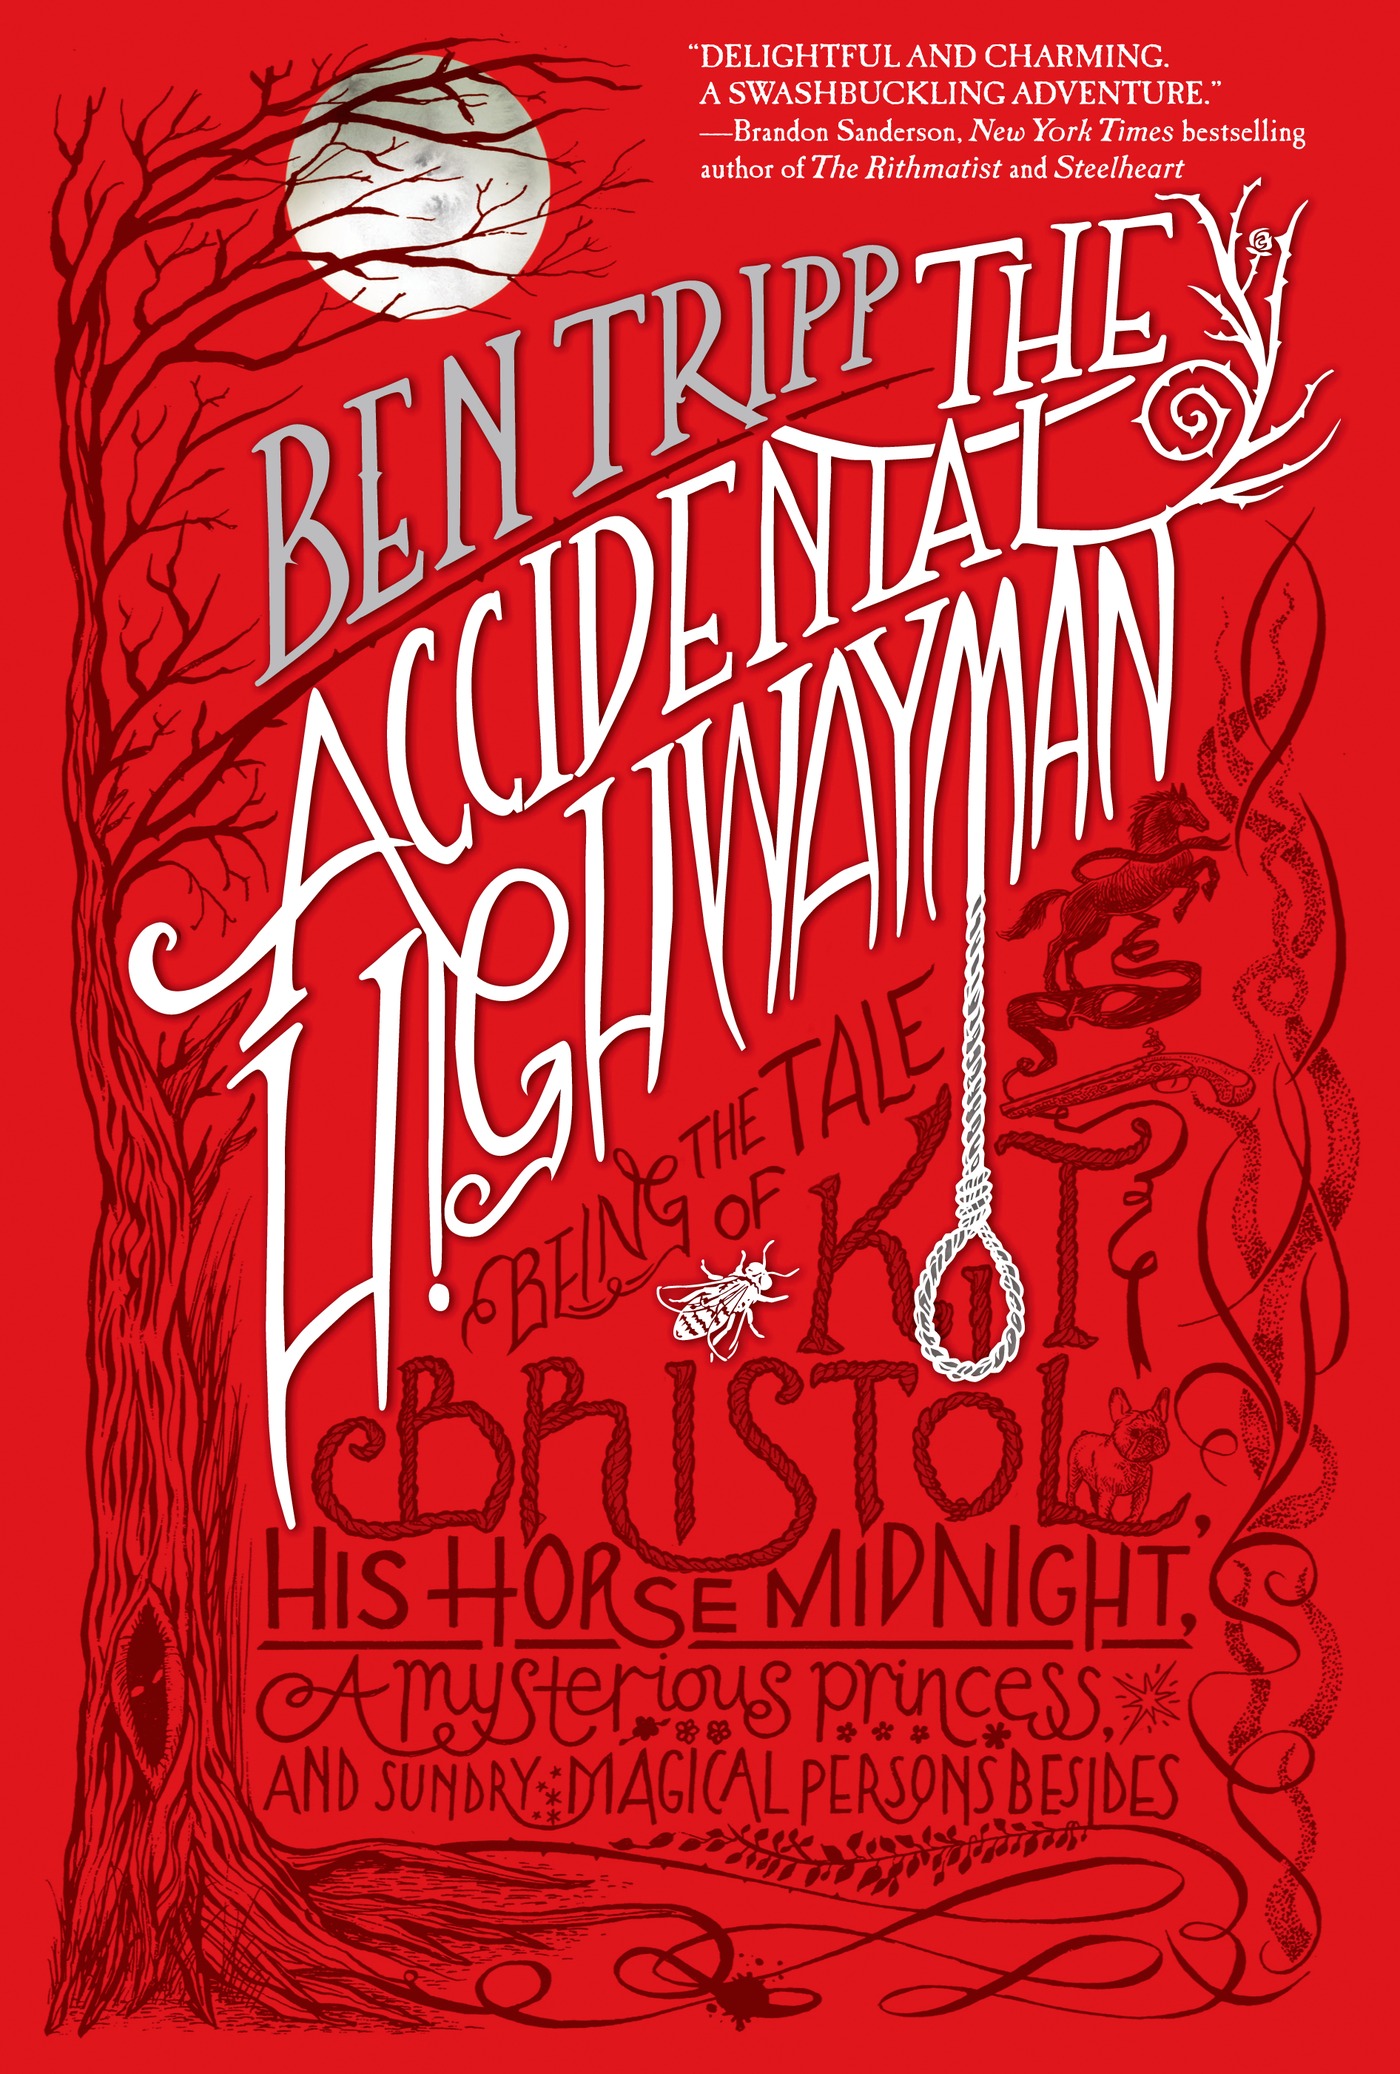 The accidental highwayman : being the tale of Kit Bristol, his horse Midnight, a mysterious princess, and sundry magical persons besides cover image